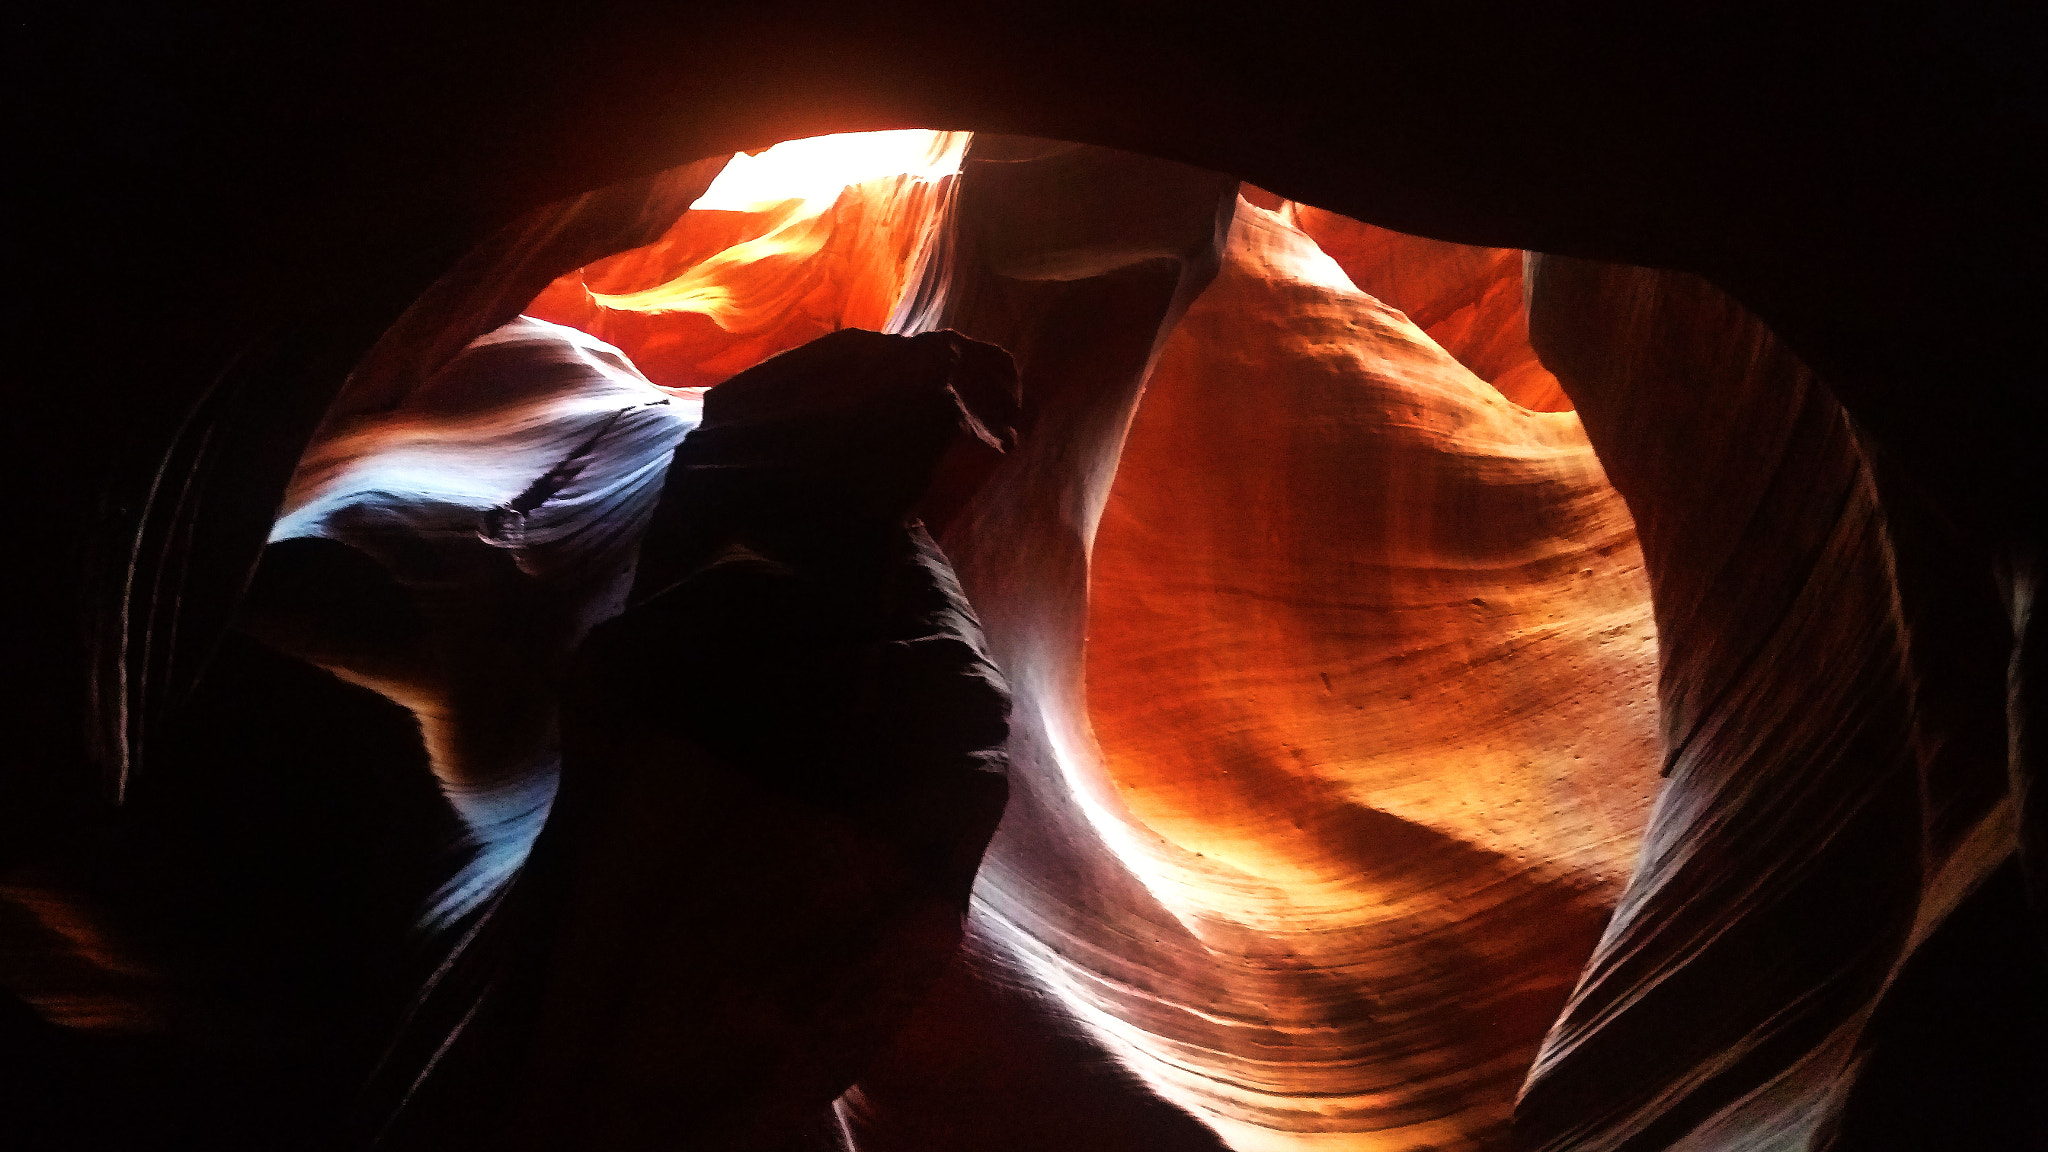 HTC ONE M9+ sample photo. Antelope canyon photography